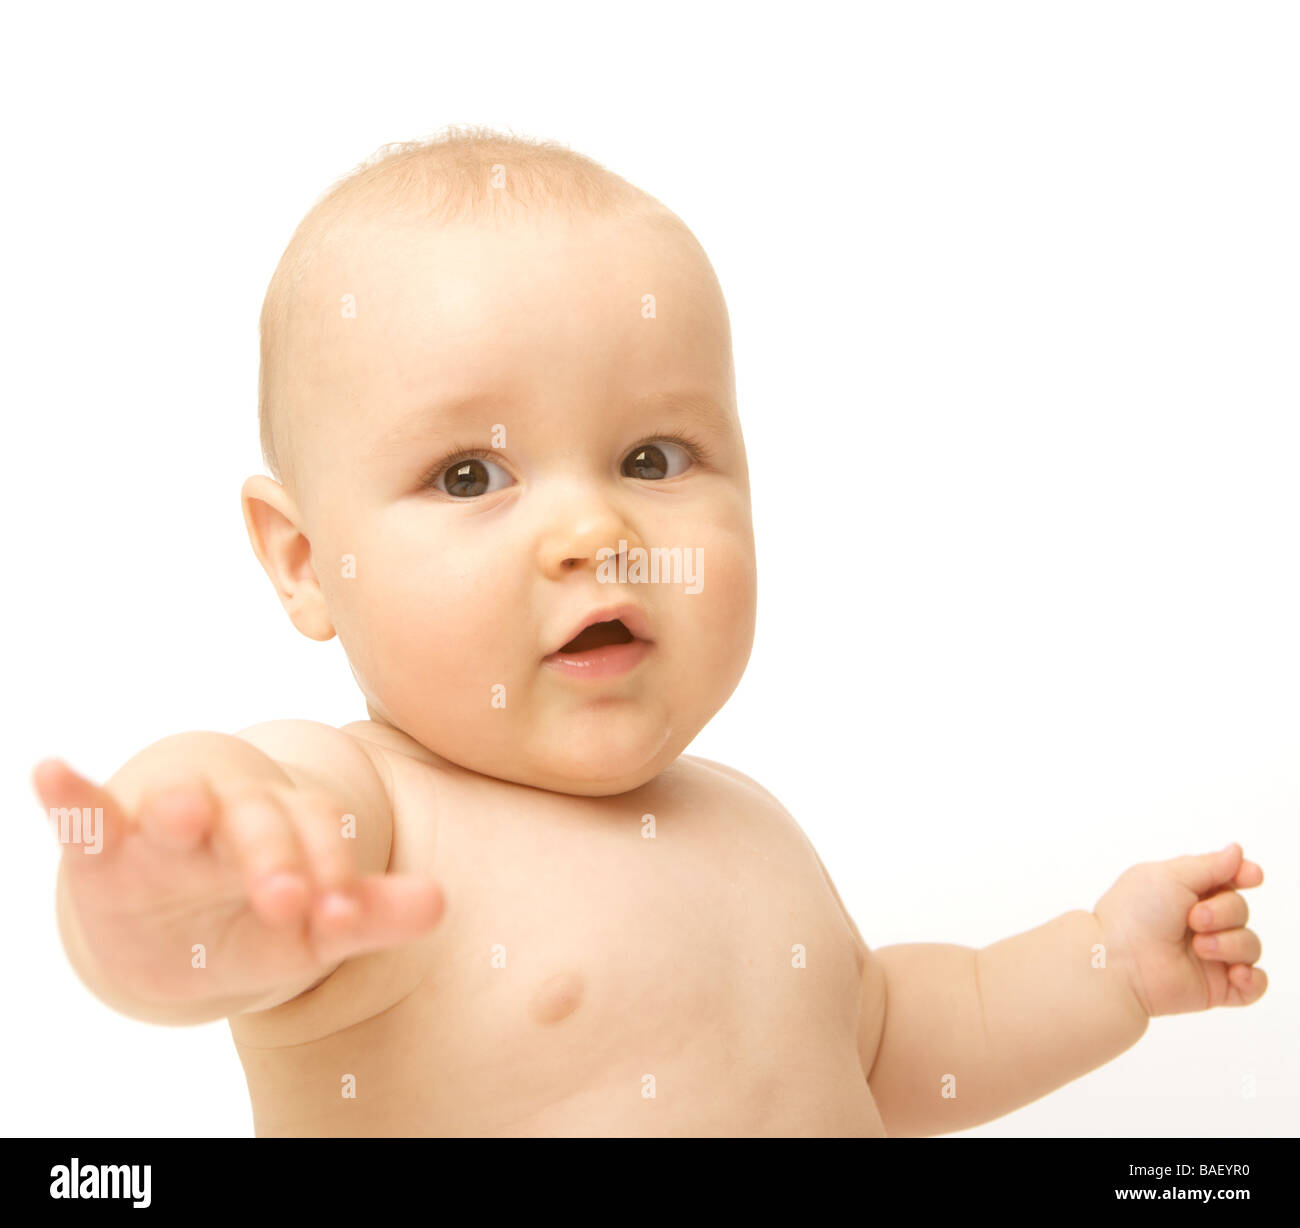 A baby points against a white backdrop Stock Photo